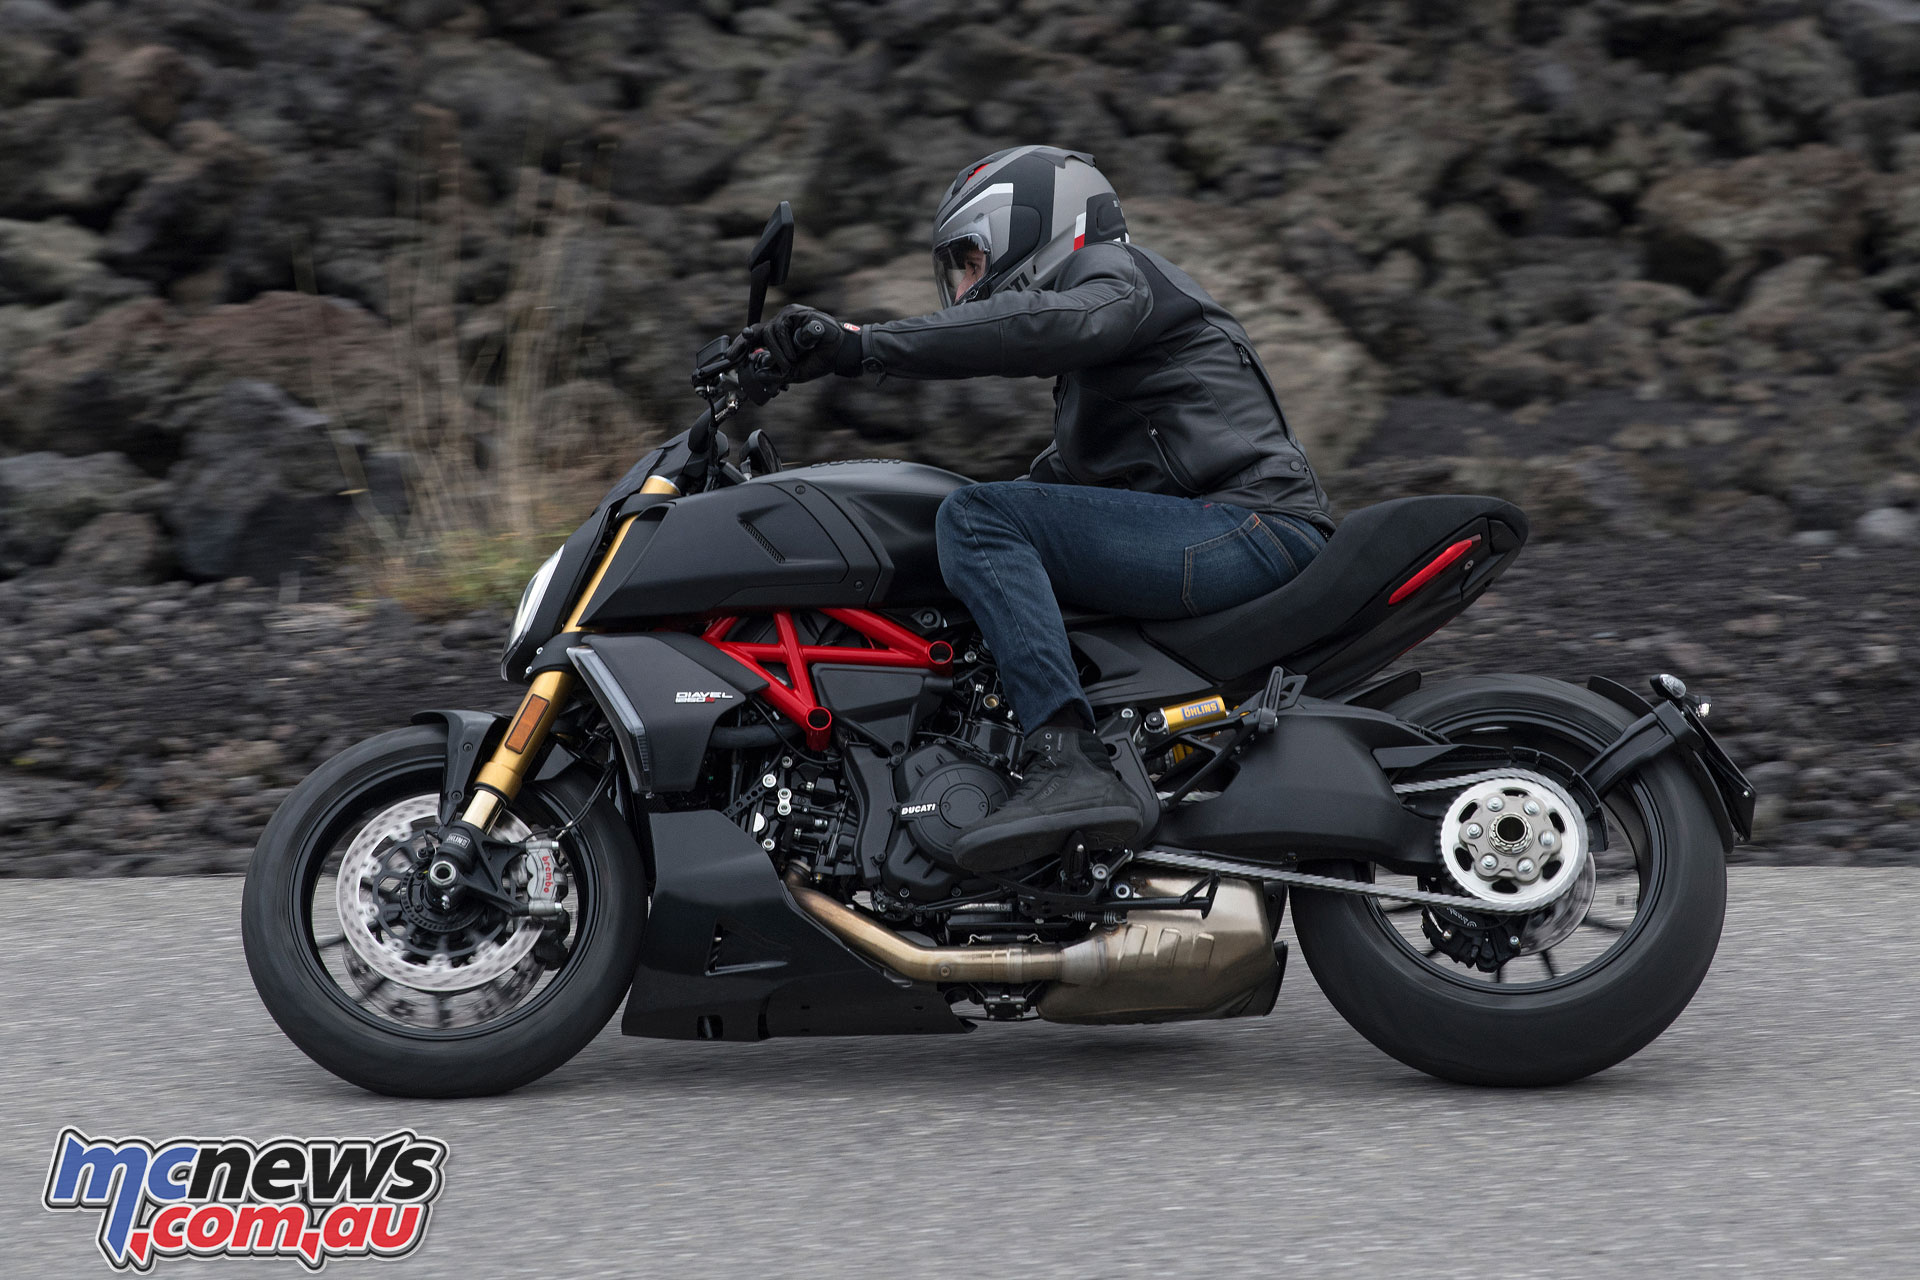 2019 Ducati Diavel And New Diavel S Get Dvt 1262 Engine Motorcycle News Sport And Reviews